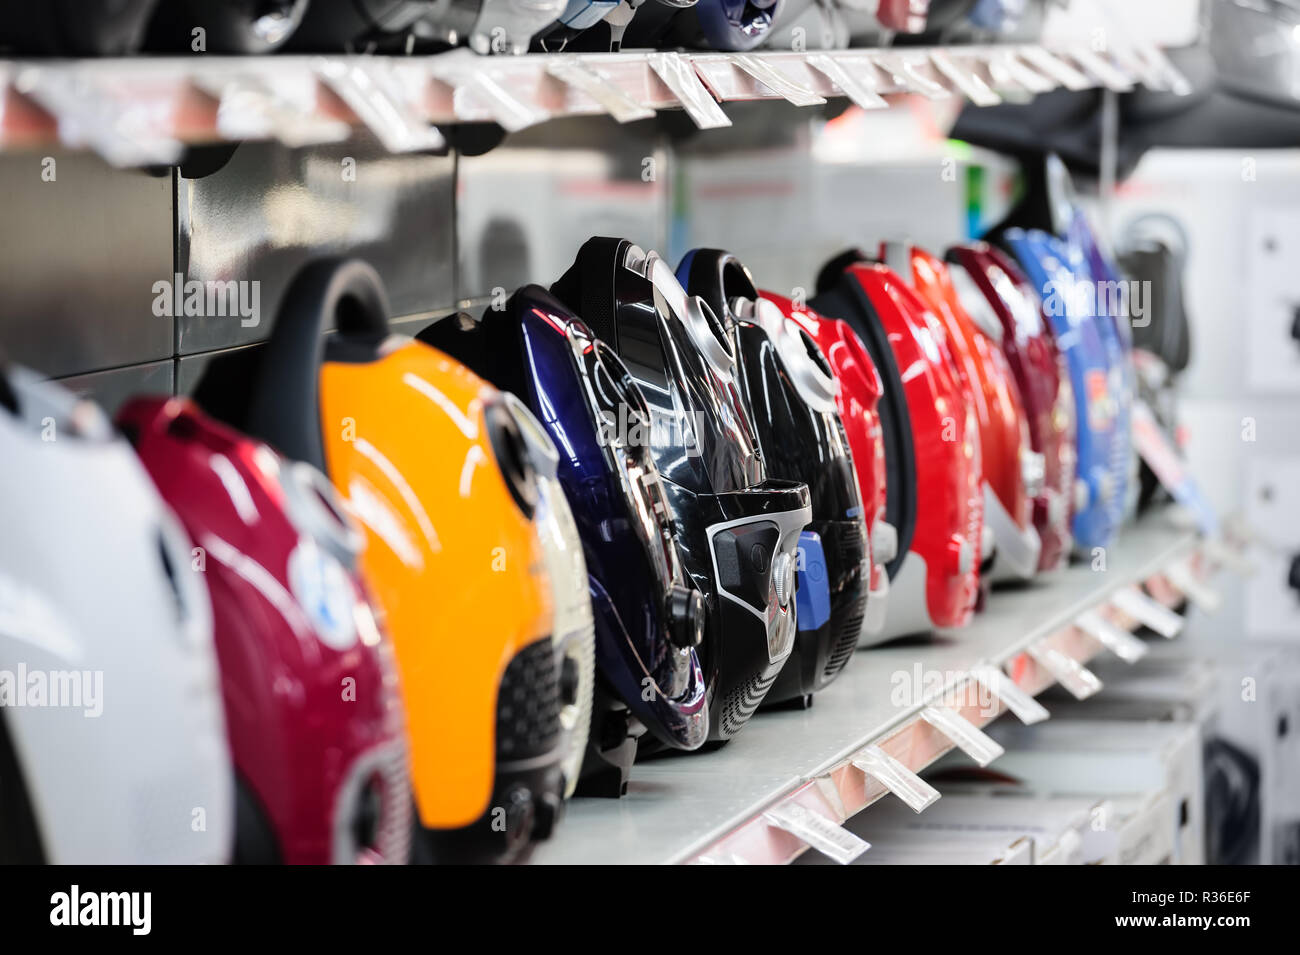 Row of vacuum cleaners in appliance store Stock Photo